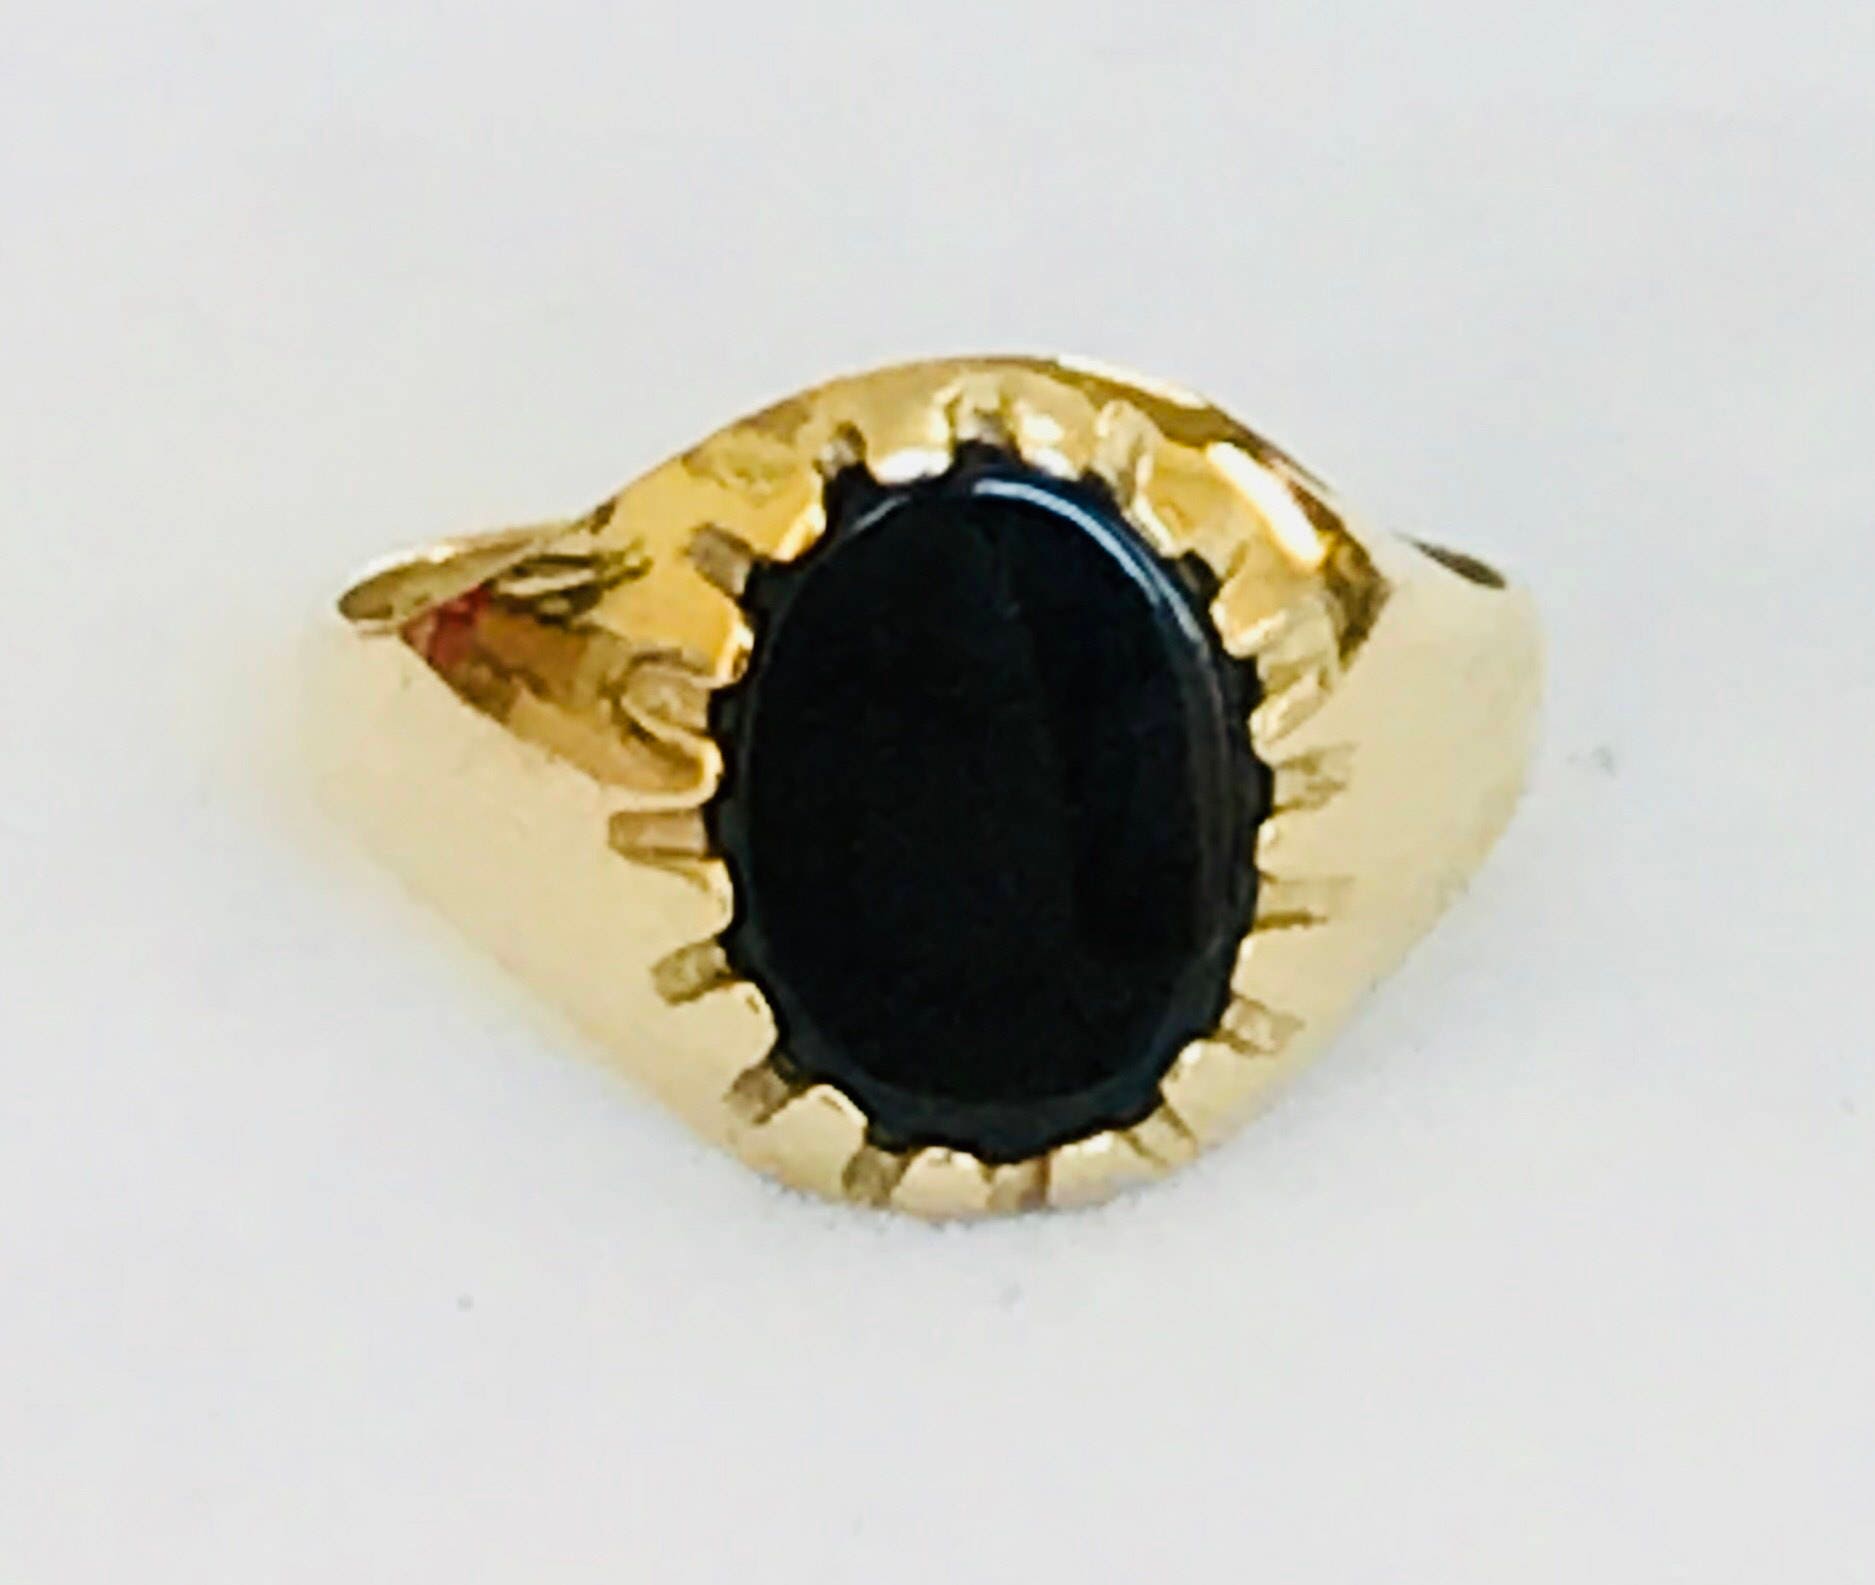 Vintage 9ct gold childs / ladies pinky onyx signet ring - fully hallmarked